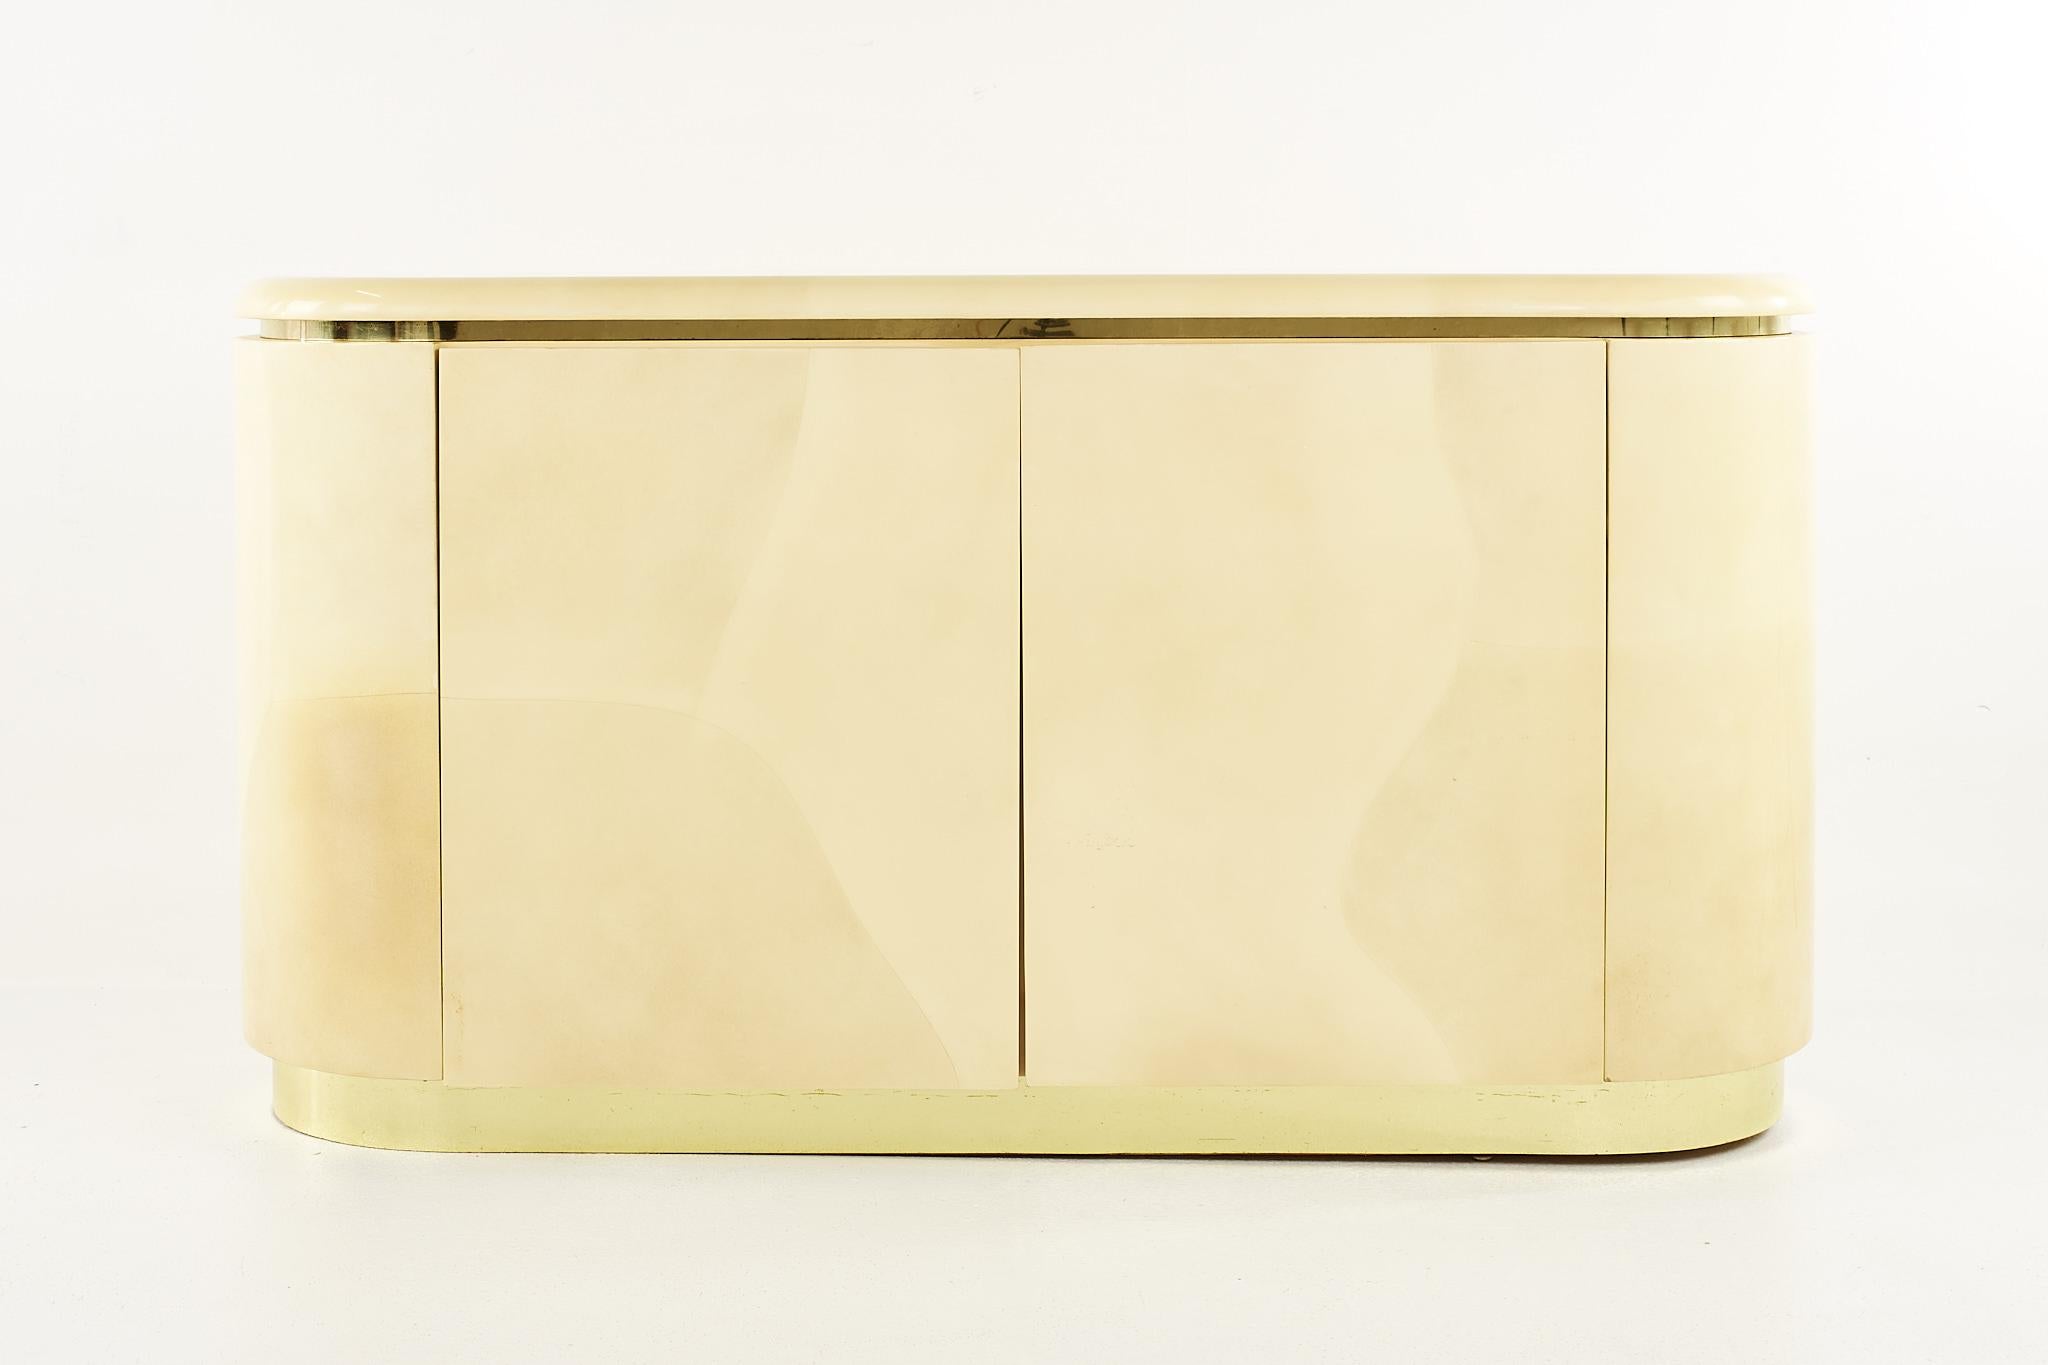 Karl Springer mid century brass and lacquered goat skin credenza

This credenza measures: 59 wide x 18 deep x 31.75 inches high

All pieces of furniture can be had in what we call restored vintage condition. That means the piece is restored upon